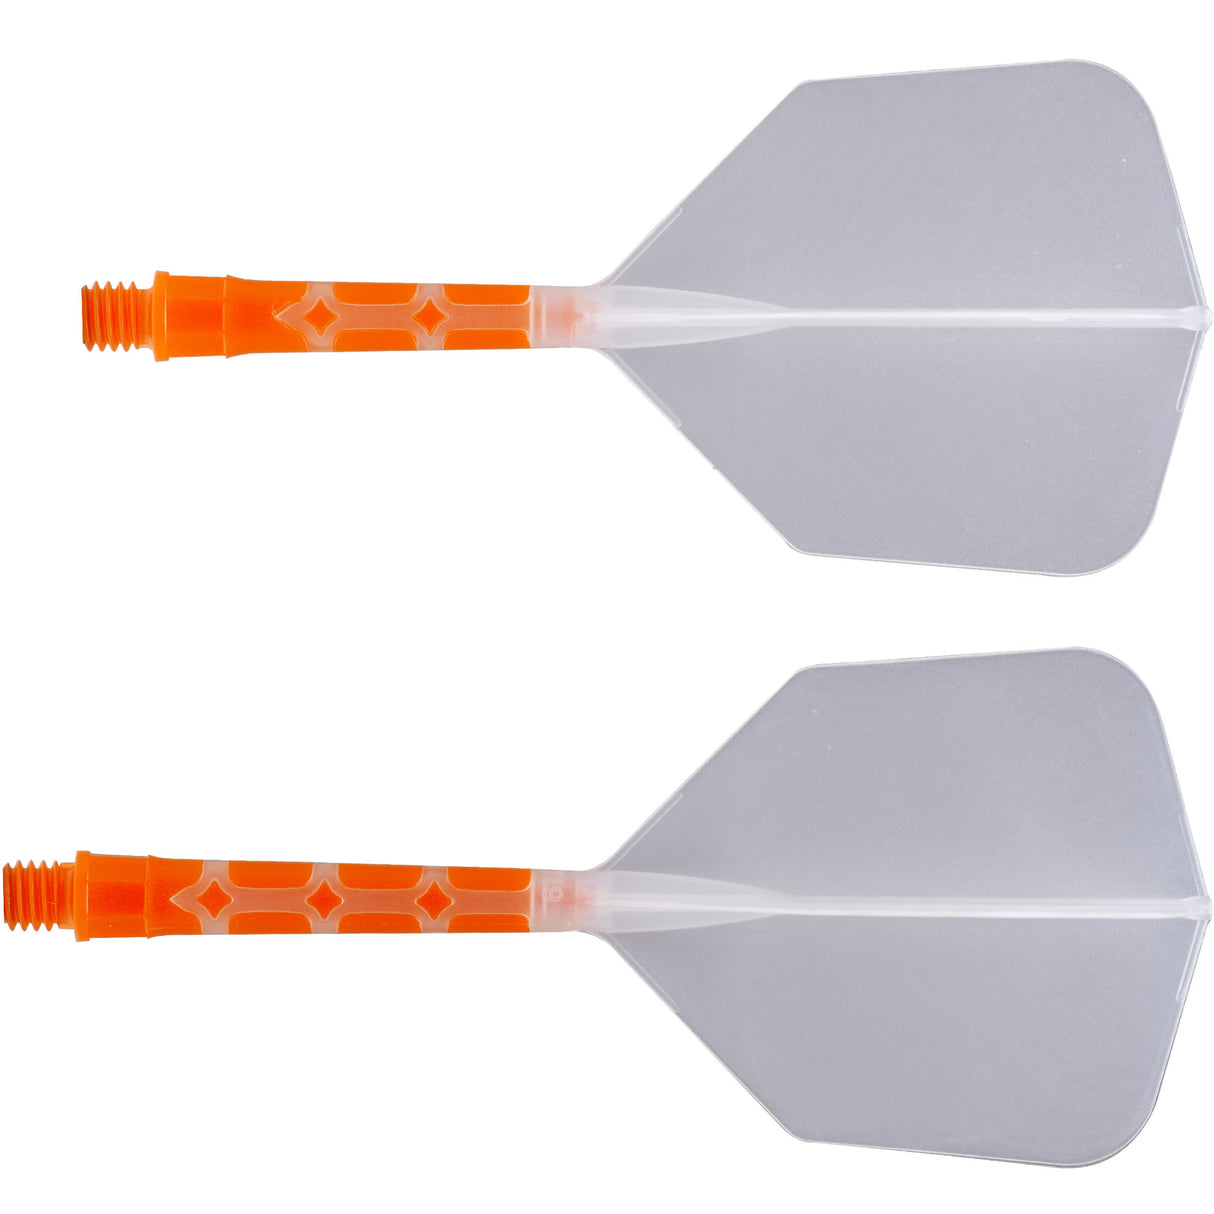 *Cuesoul Rost T19 Integrated Dart Shaft and Flights - Big Wing - Orange with Clear Flight